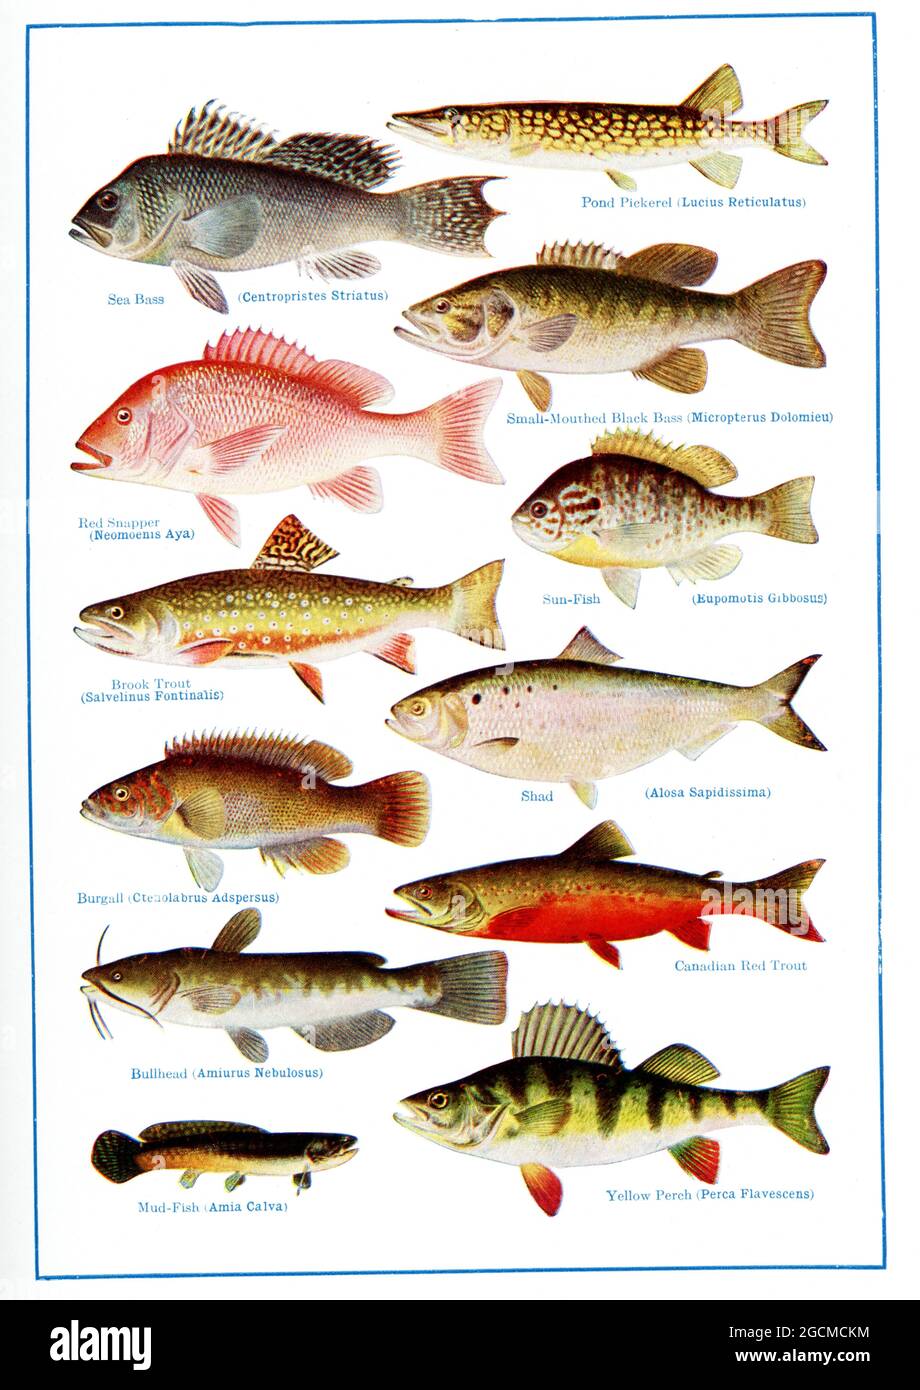 The caption and labels for this 1917 image read: “North American food and Game Fishes. Top to bottom, left to right: Sea Bass (Centropristes Striatus); Pond Pickerel (Lucius Reticulatus); Red Snapper (Neomoenis Aya); Small-mouthes Black Bass (Micropterus Dolomieu); Brook Trout (Salvelinus Fontinalis); Sun Fish (Eupomotis Gibbosus); Burgali (Ctenolabrus Adspersus); Shad (Alosa Sapidissima); Bullhead (Amiurus Nebulosus); Canadian Red Trout; Mud-Fish (Amia Calva); Yellow Perch (Perca Flavescens) Stock Photo